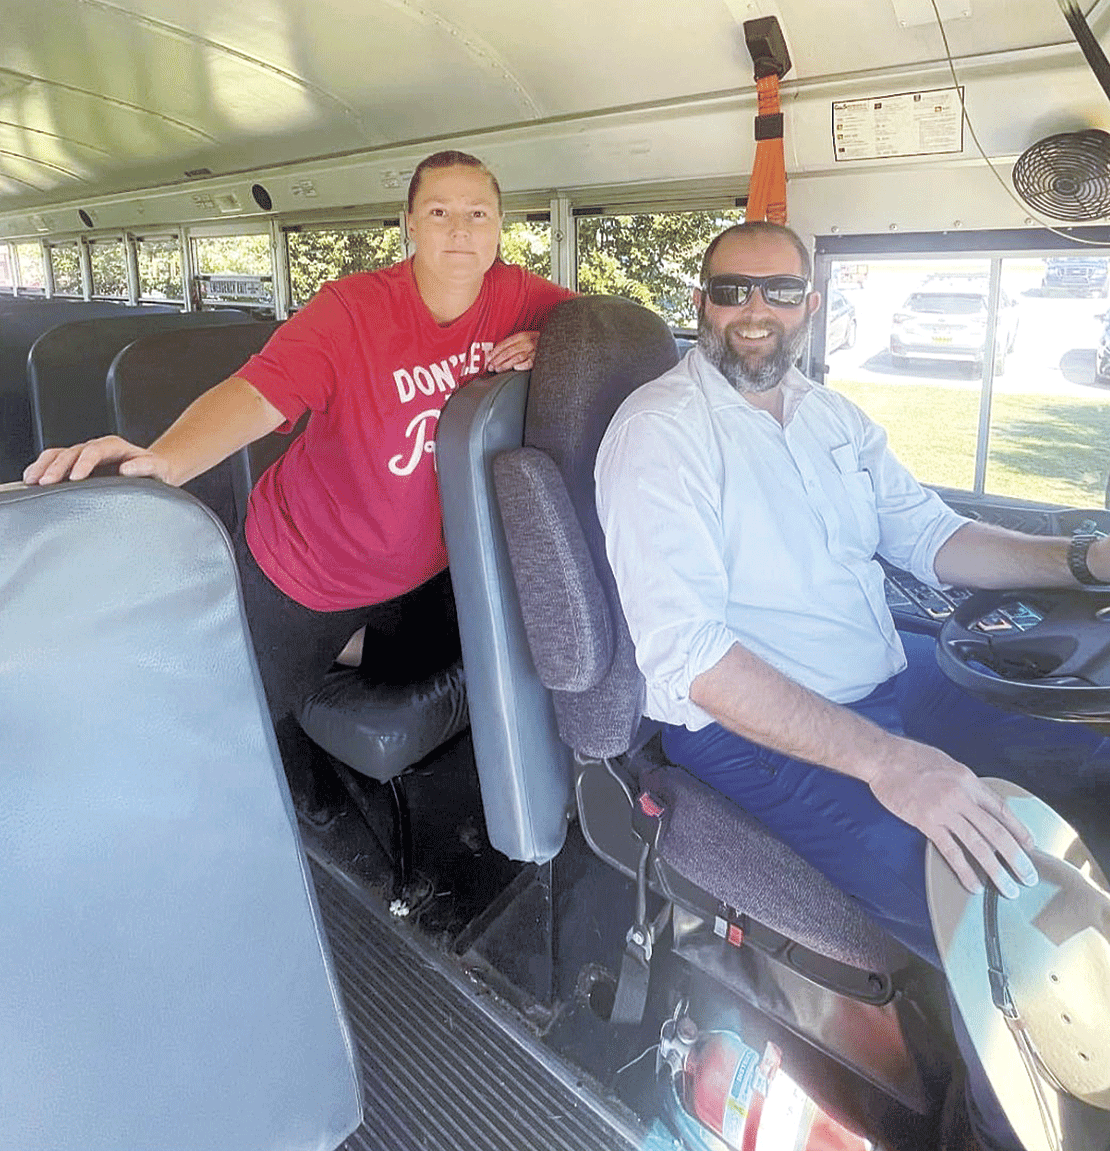 McKENZIE &mdash; Dr. Justin Barden is in his first three months of service as the director of schools in McKenzie. One day last week, he temporarily accepted another assignment: substitute bus driver. With the assistance of his volunteer navigator, Amanda Cowan, they safely transported students from McKenzie Special School District.